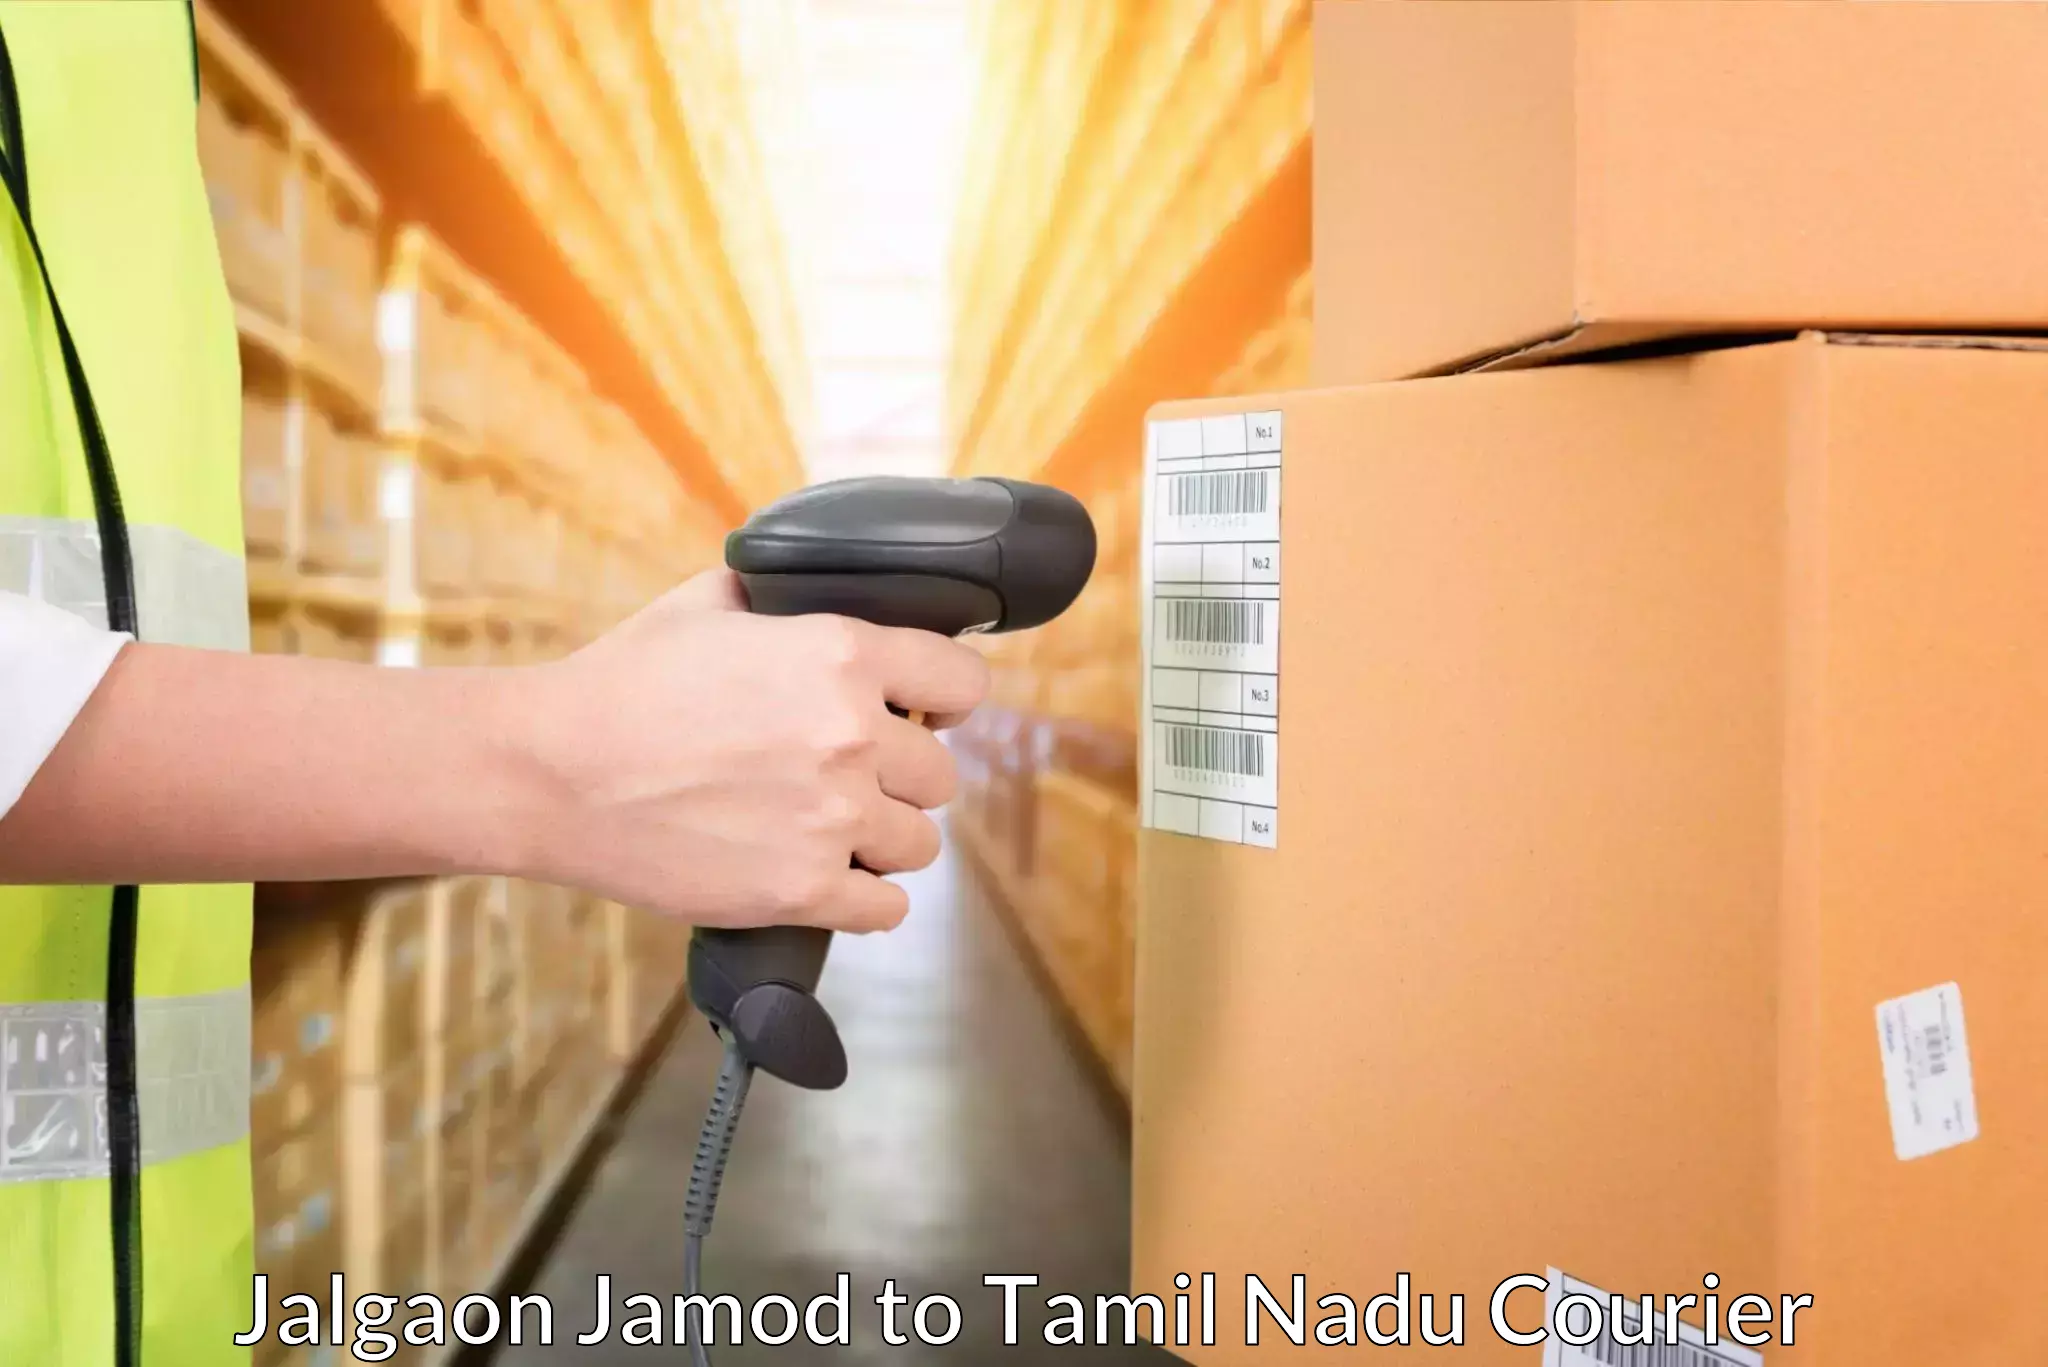 Customer-focused courier Jalgaon Jamod to Meenakshi Academy of Higher Education and Research Chennai